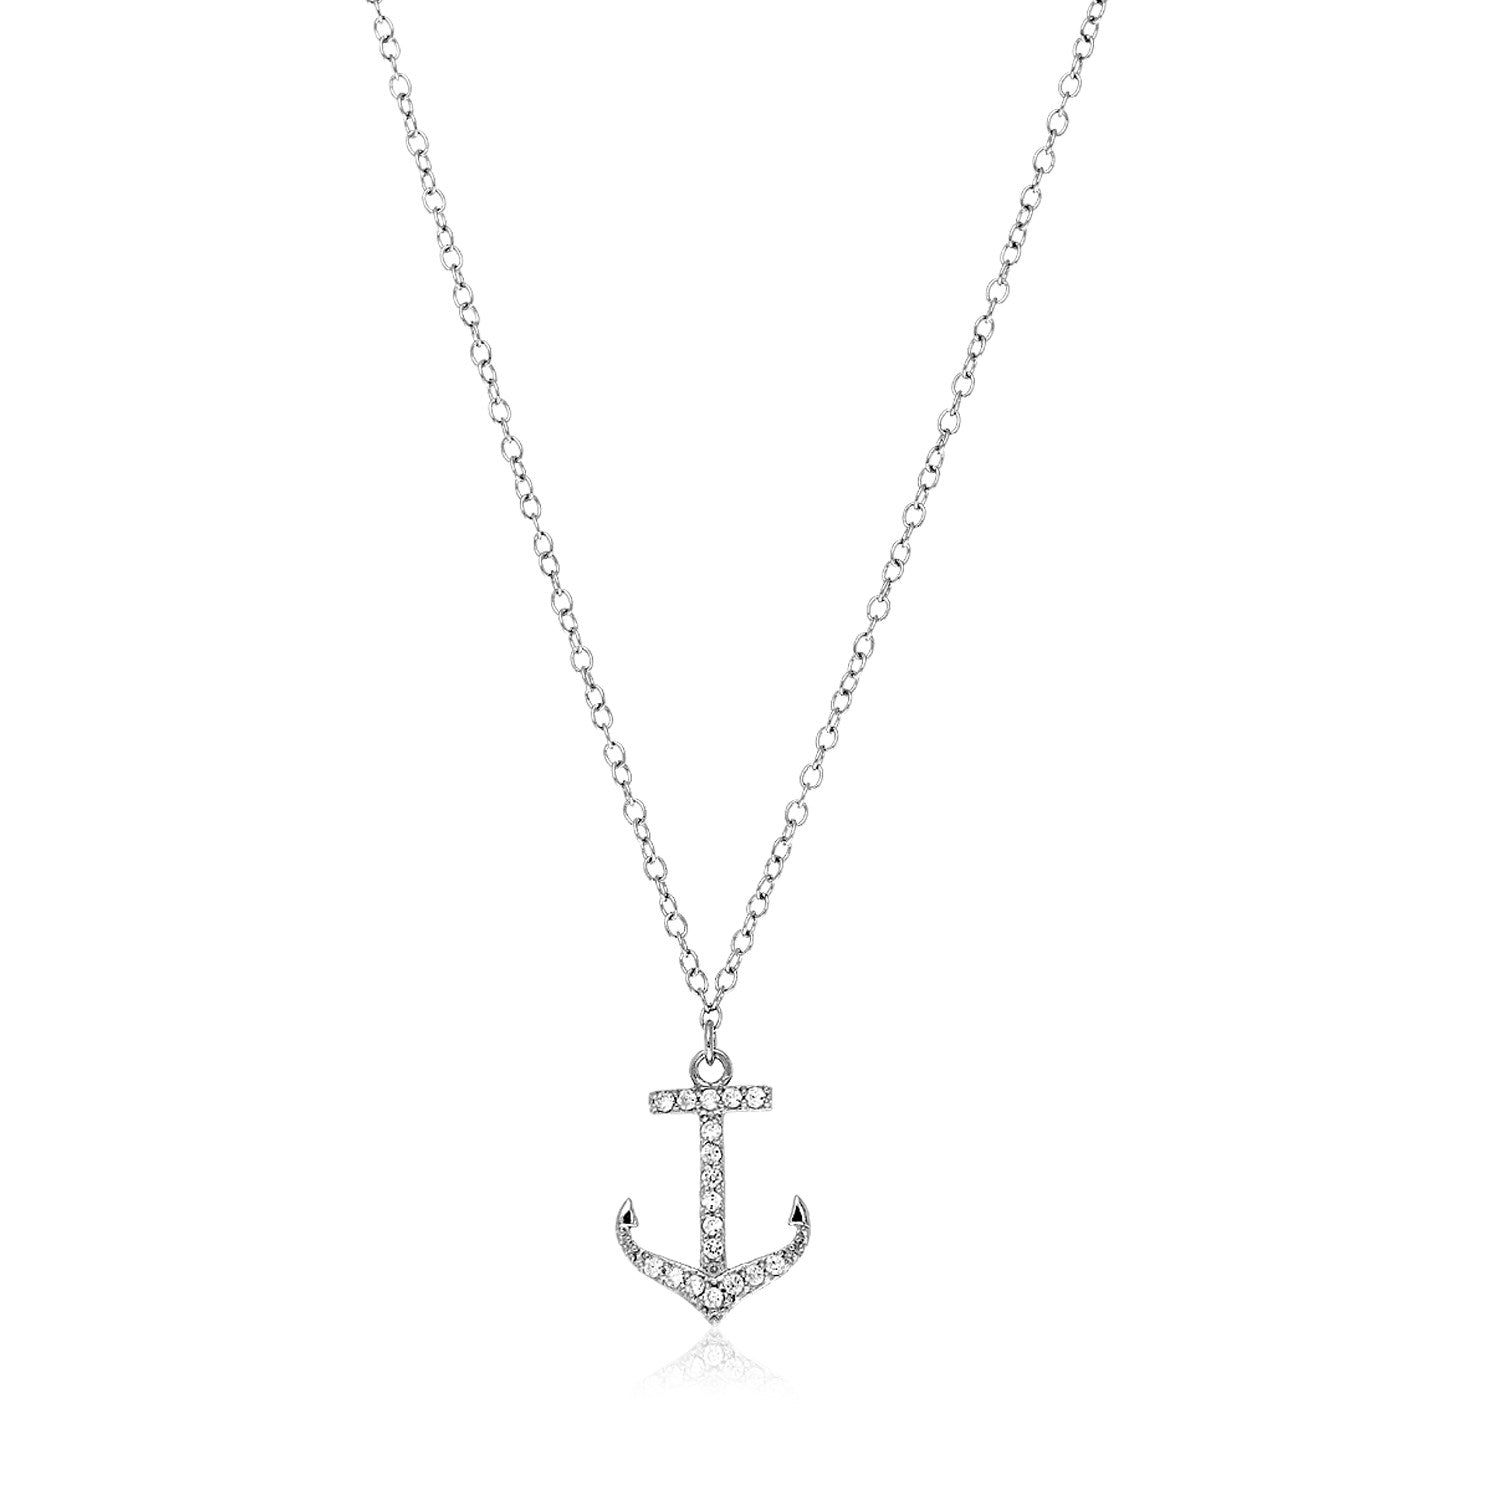 Sterling Silver Anchor Necklace with Cubic Zirconias